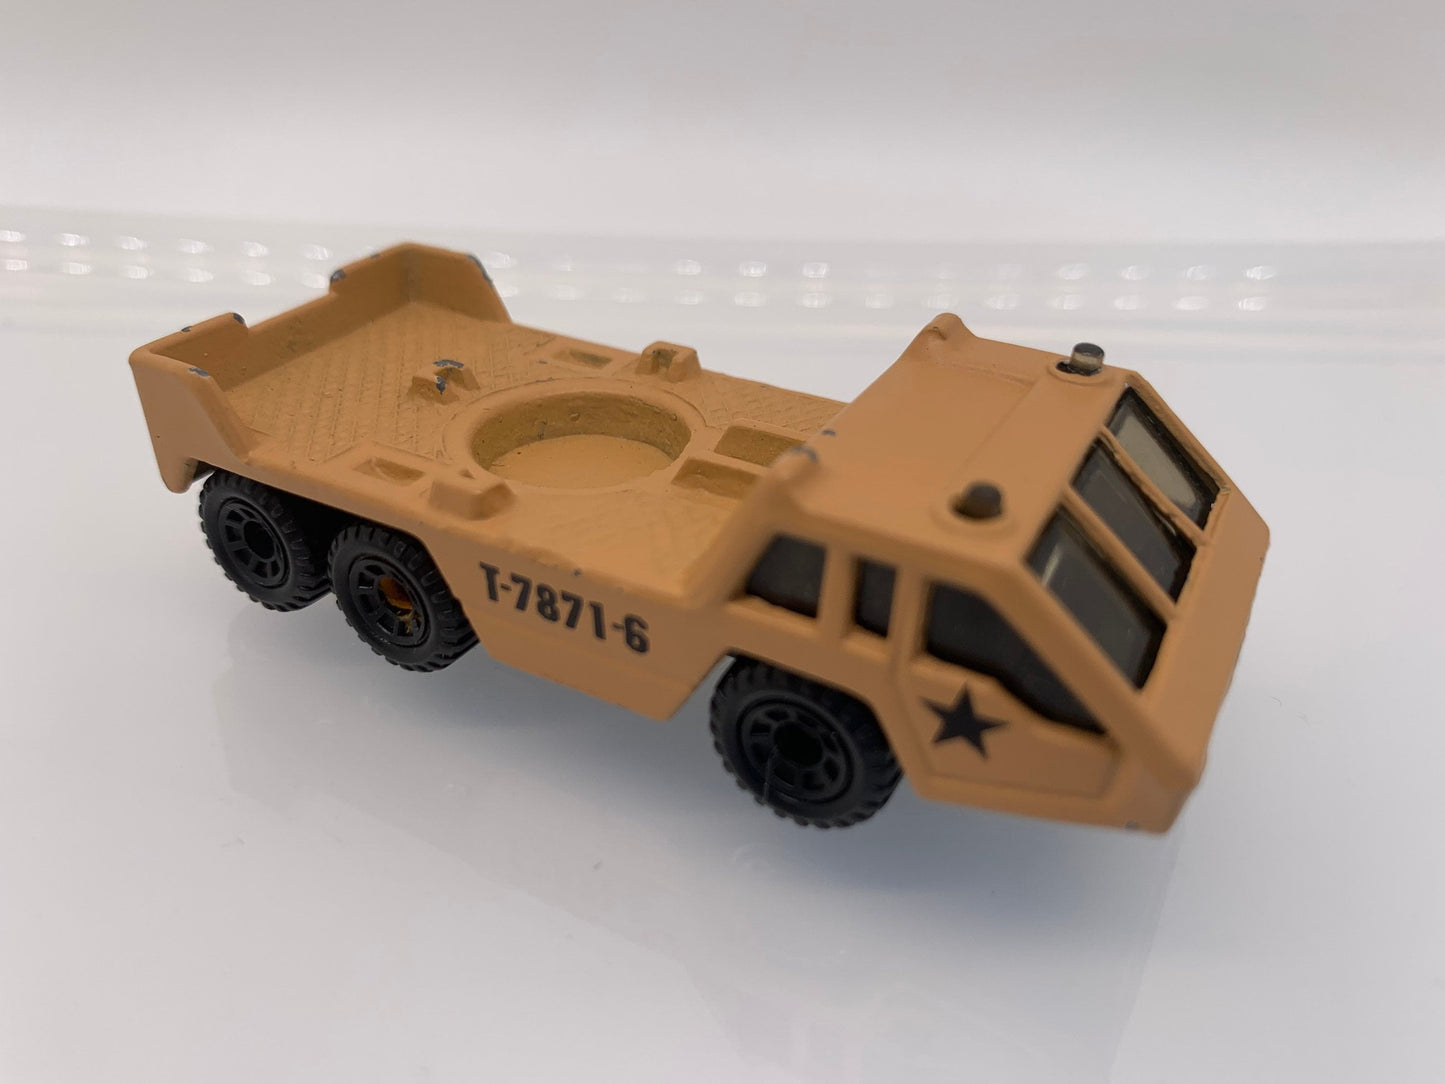 Matchbox Transporter Vehicle Tan Perfect Birthday Gift Miniature Collectable Model Toy Car